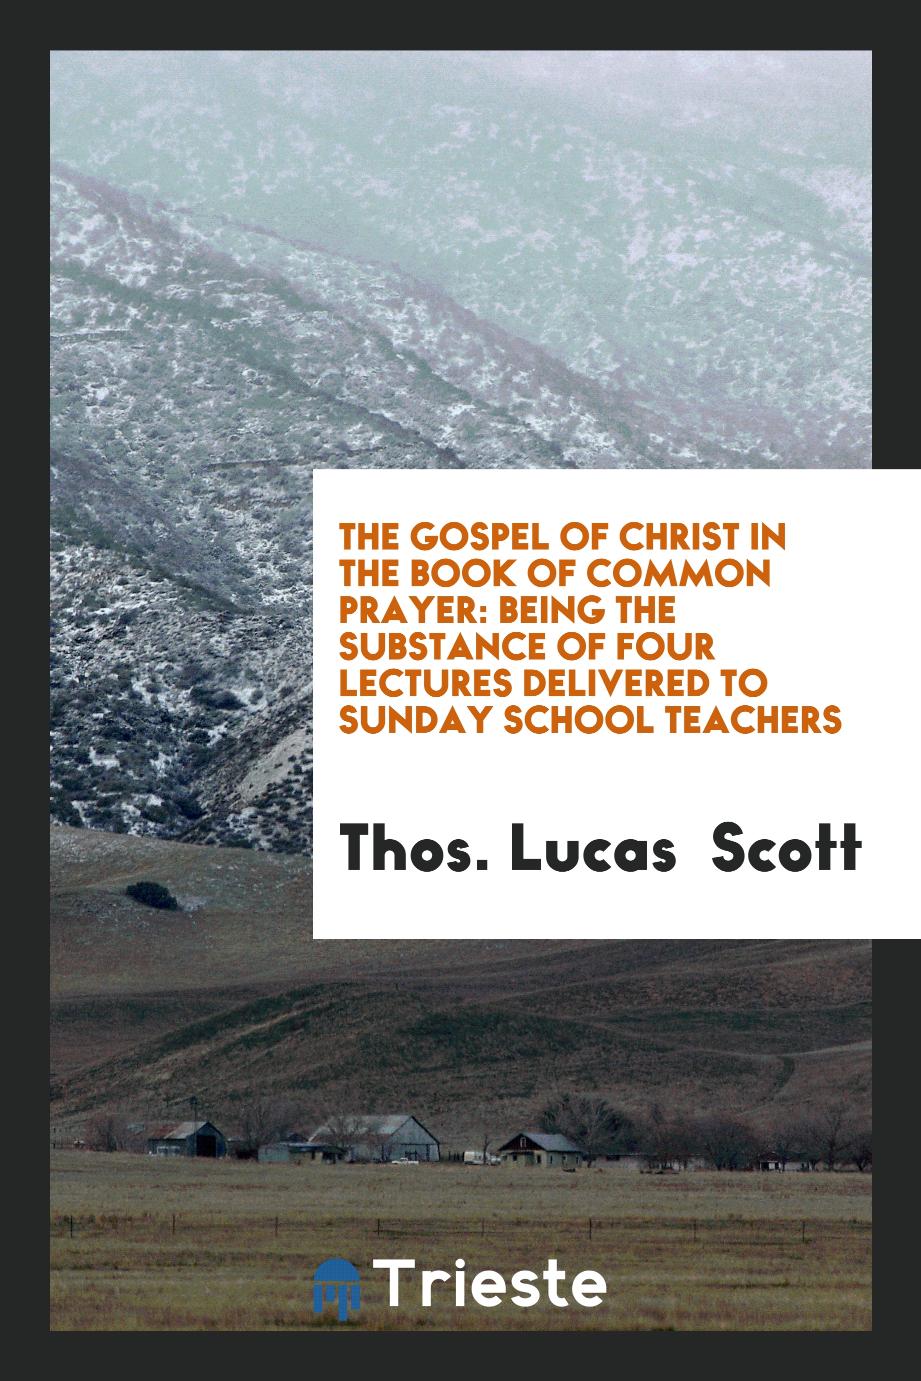 The Gospel of Christ in the Book of Common Prayer: Being the Substance of Four Lectures Delivered to Sunday School Teachers